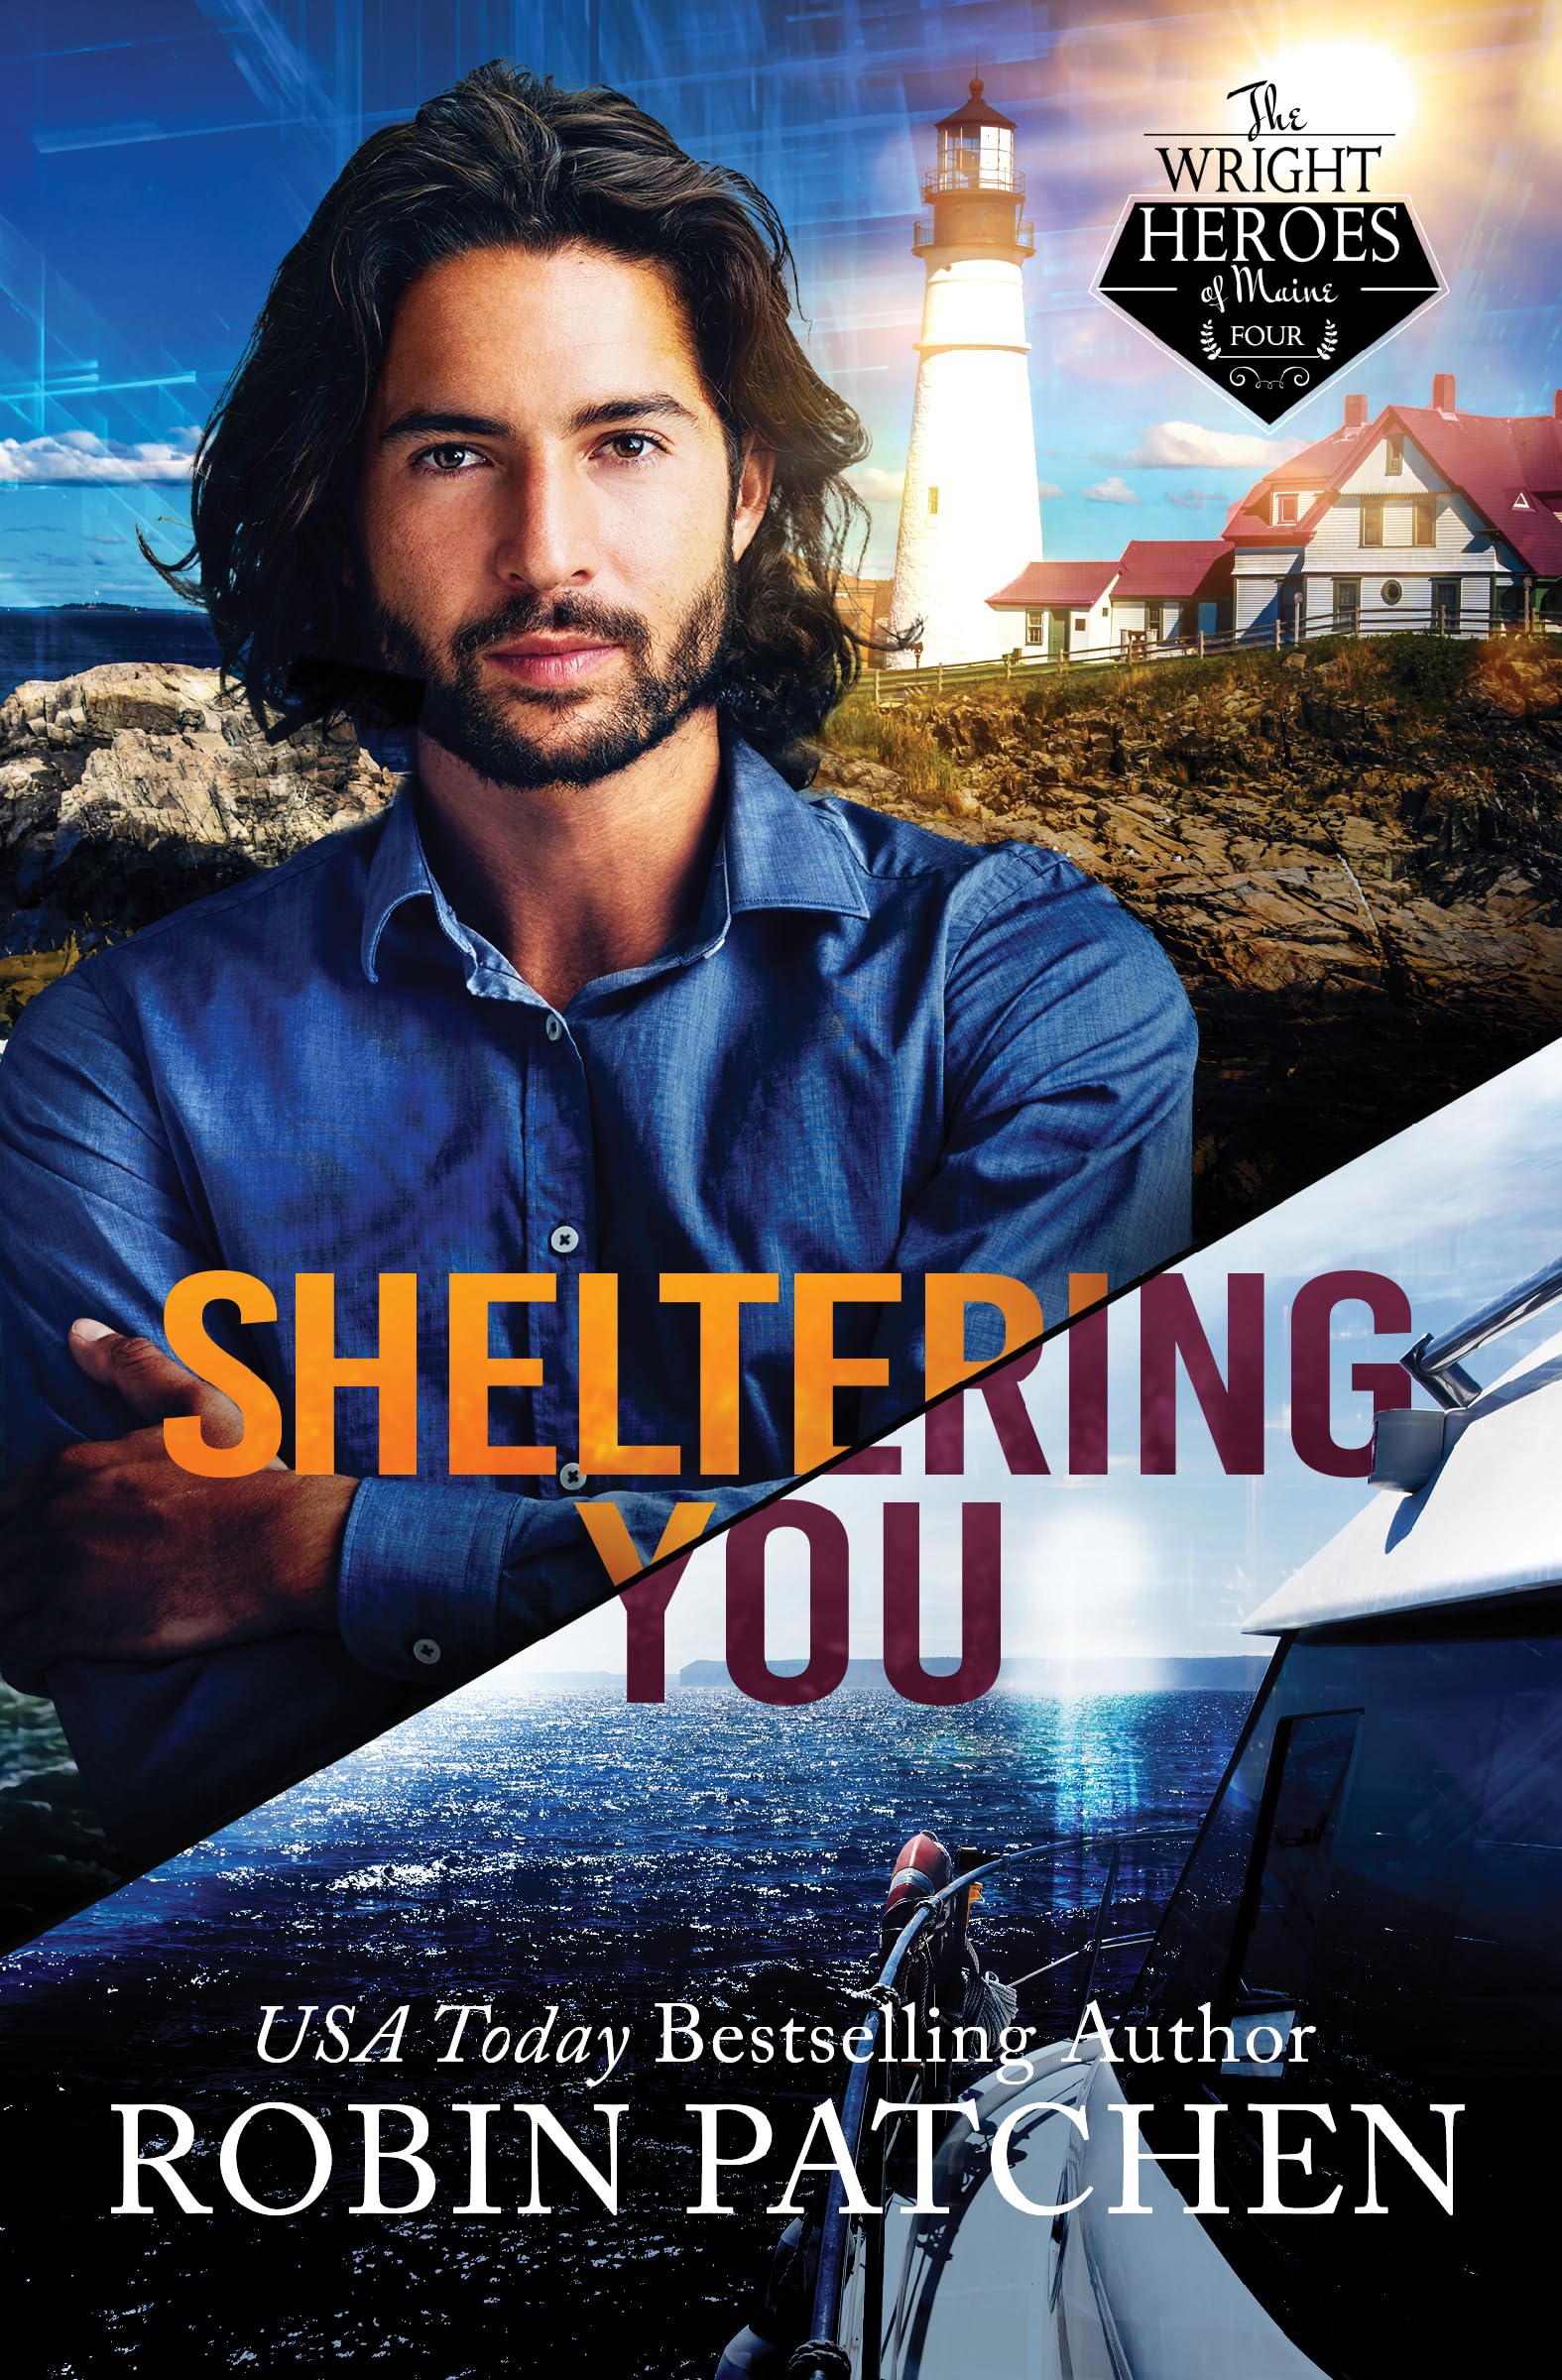 Sheltering You: Terror in Shadow Cove (The Wright Heroes of Maine Book 4)